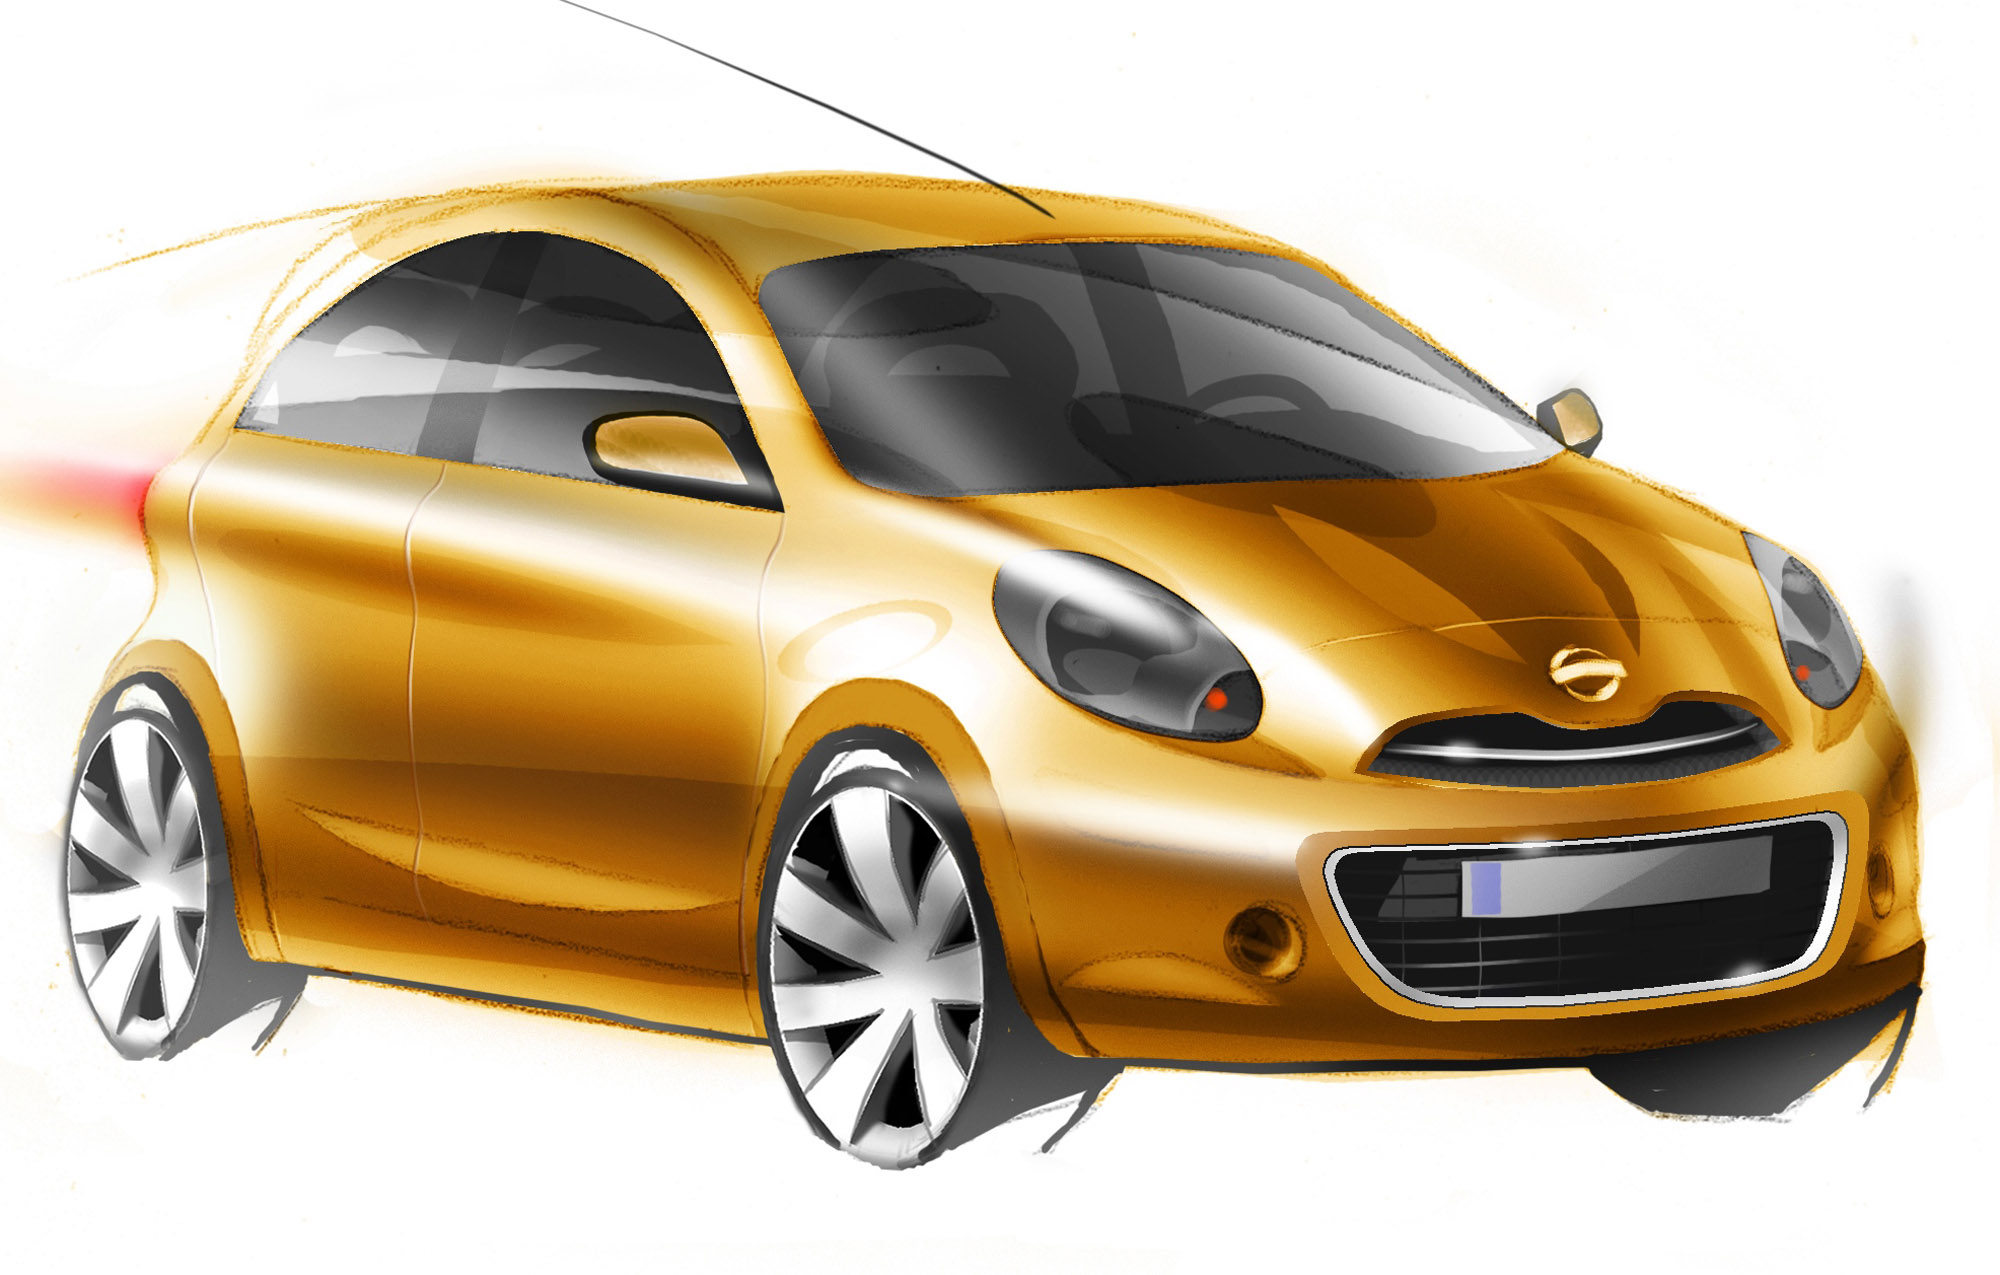 Nissan Global Compact Car sketches